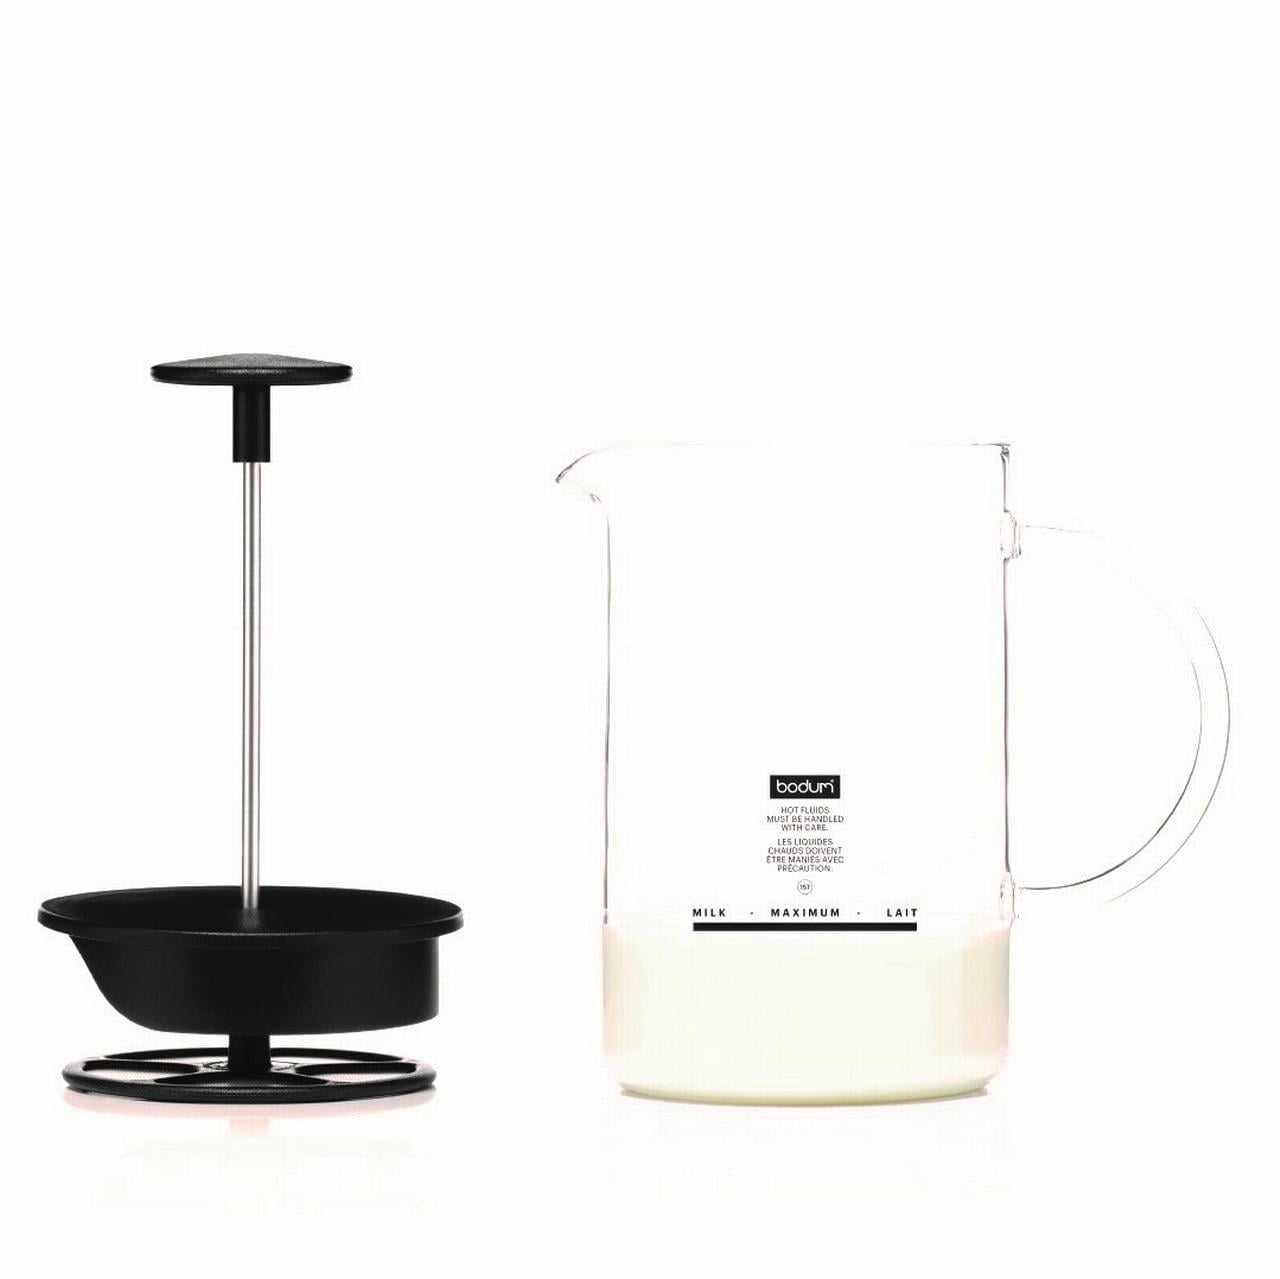 Bodum Latteo Milk Frother with Glass Handle, 0.25 L, 8 oz Black